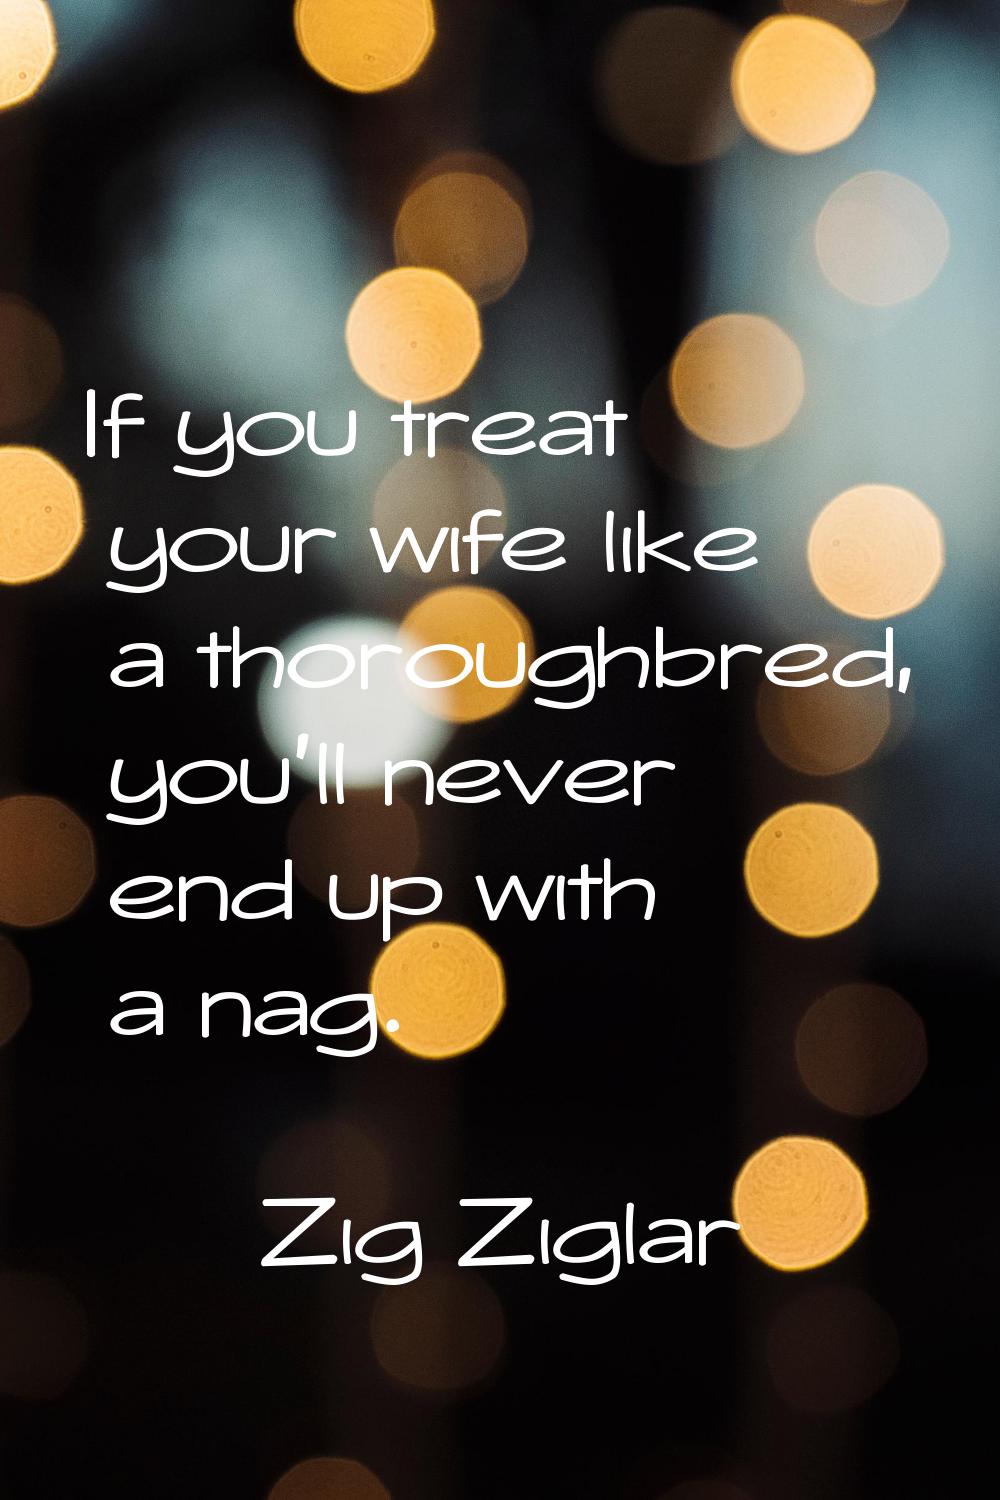 If you treat your wife like a thoroughbred, you'll never end up with a nag.